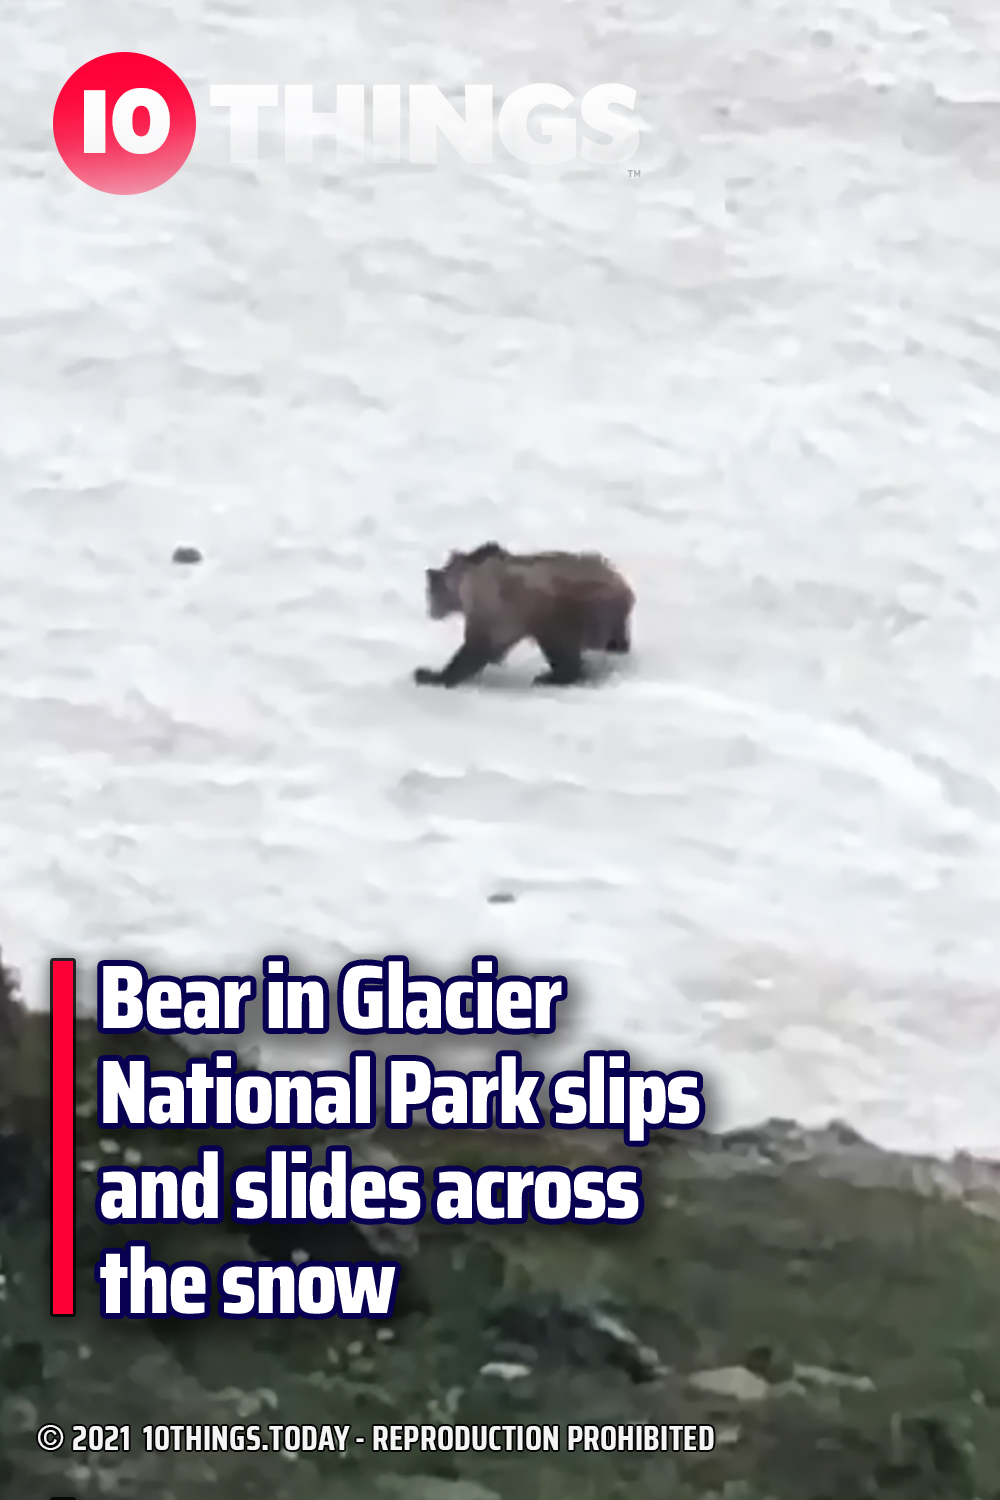 Bear in Glacier National Park slips and slides across the snow